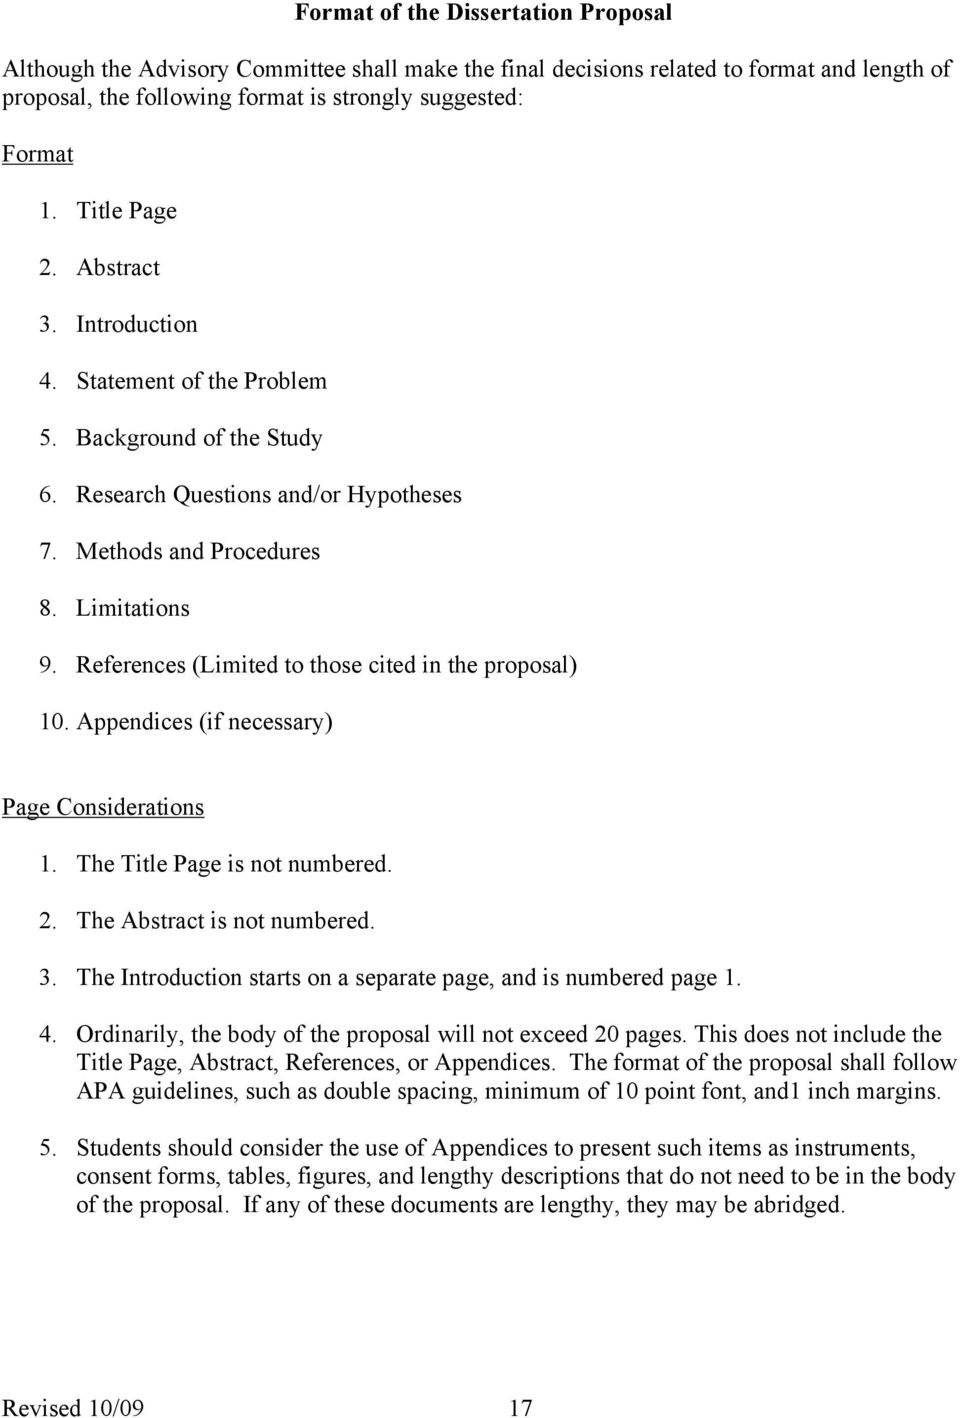 References (Limited to those cited in the proposal) 10. Appendices (if necessary) Page Considerations 1. The Title Page is not numbered. 2. The Abstract is not numbered. 3.